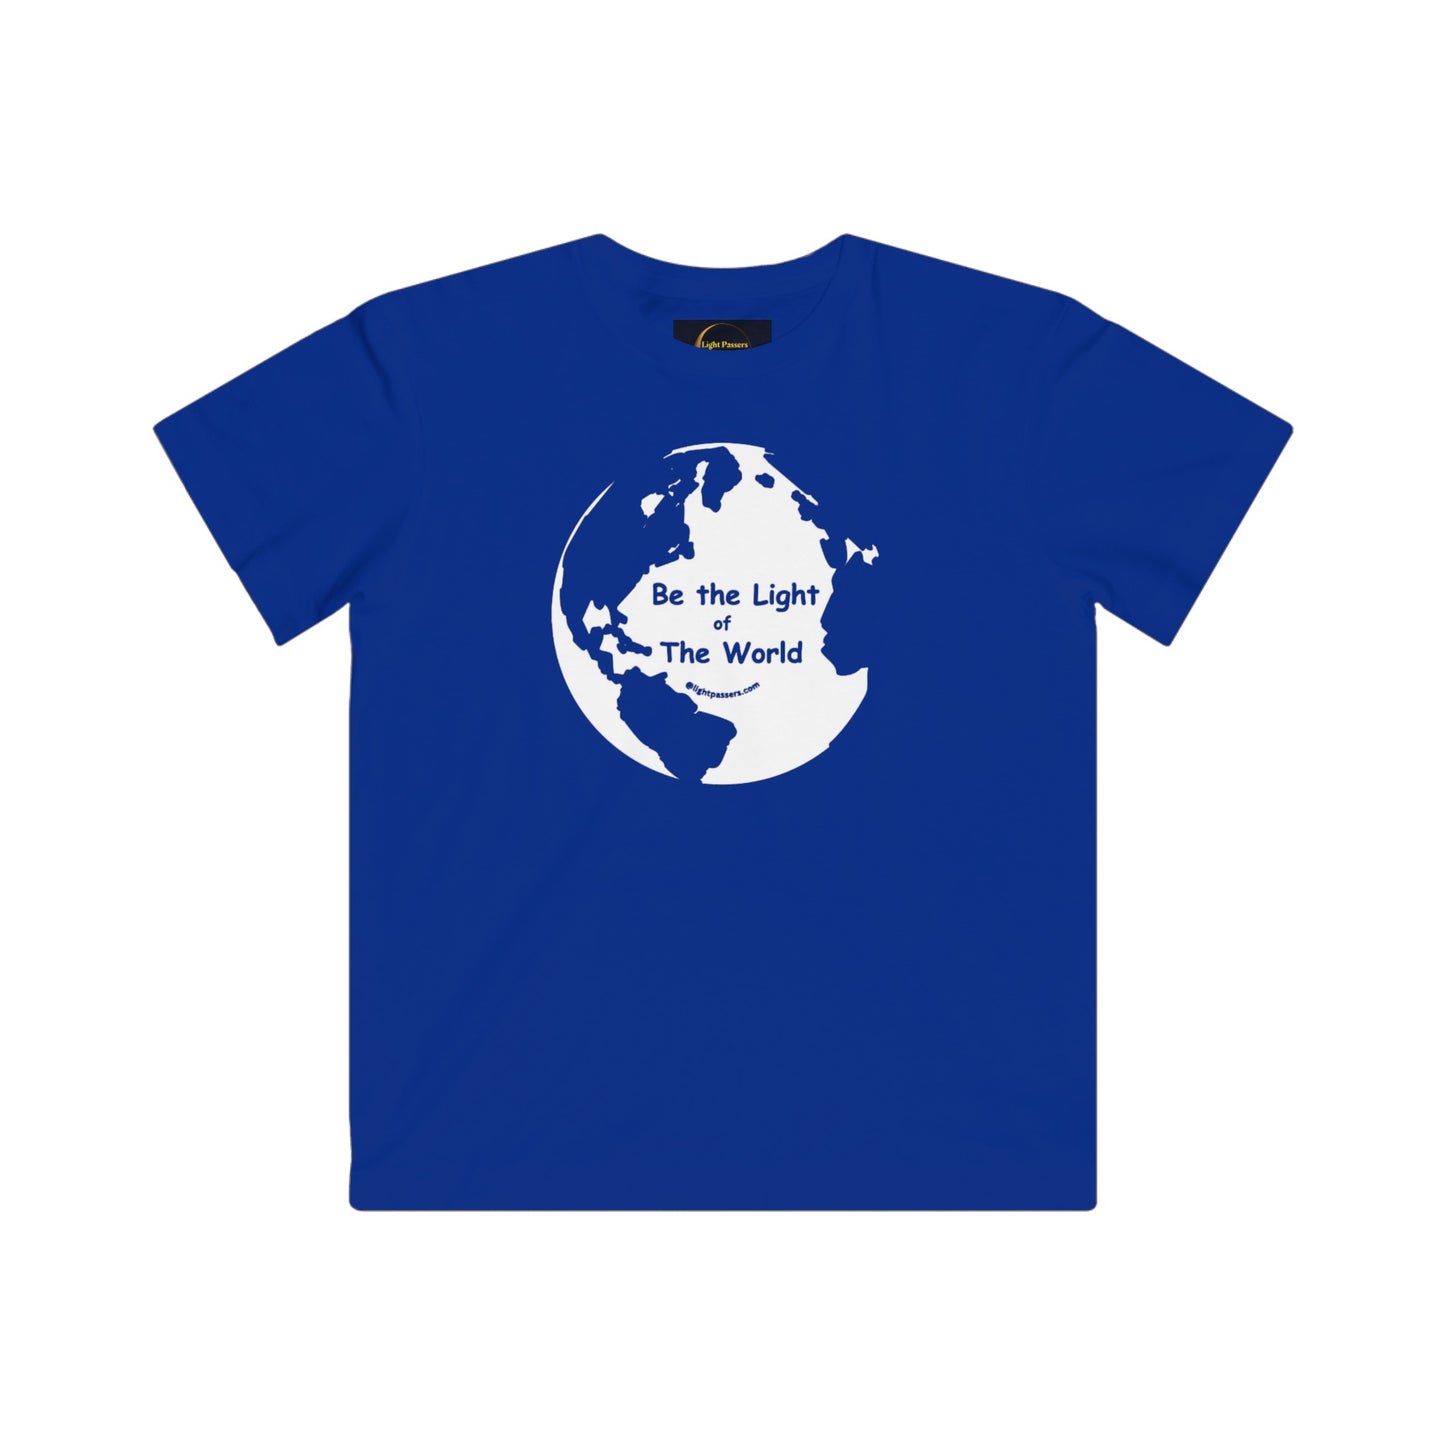 Youth t-shirt featuring a white globe design on a blue shirt. Made of soft cotton, regular fit, tear-away label, and lightweight fabric. Be the Light of the World theme.